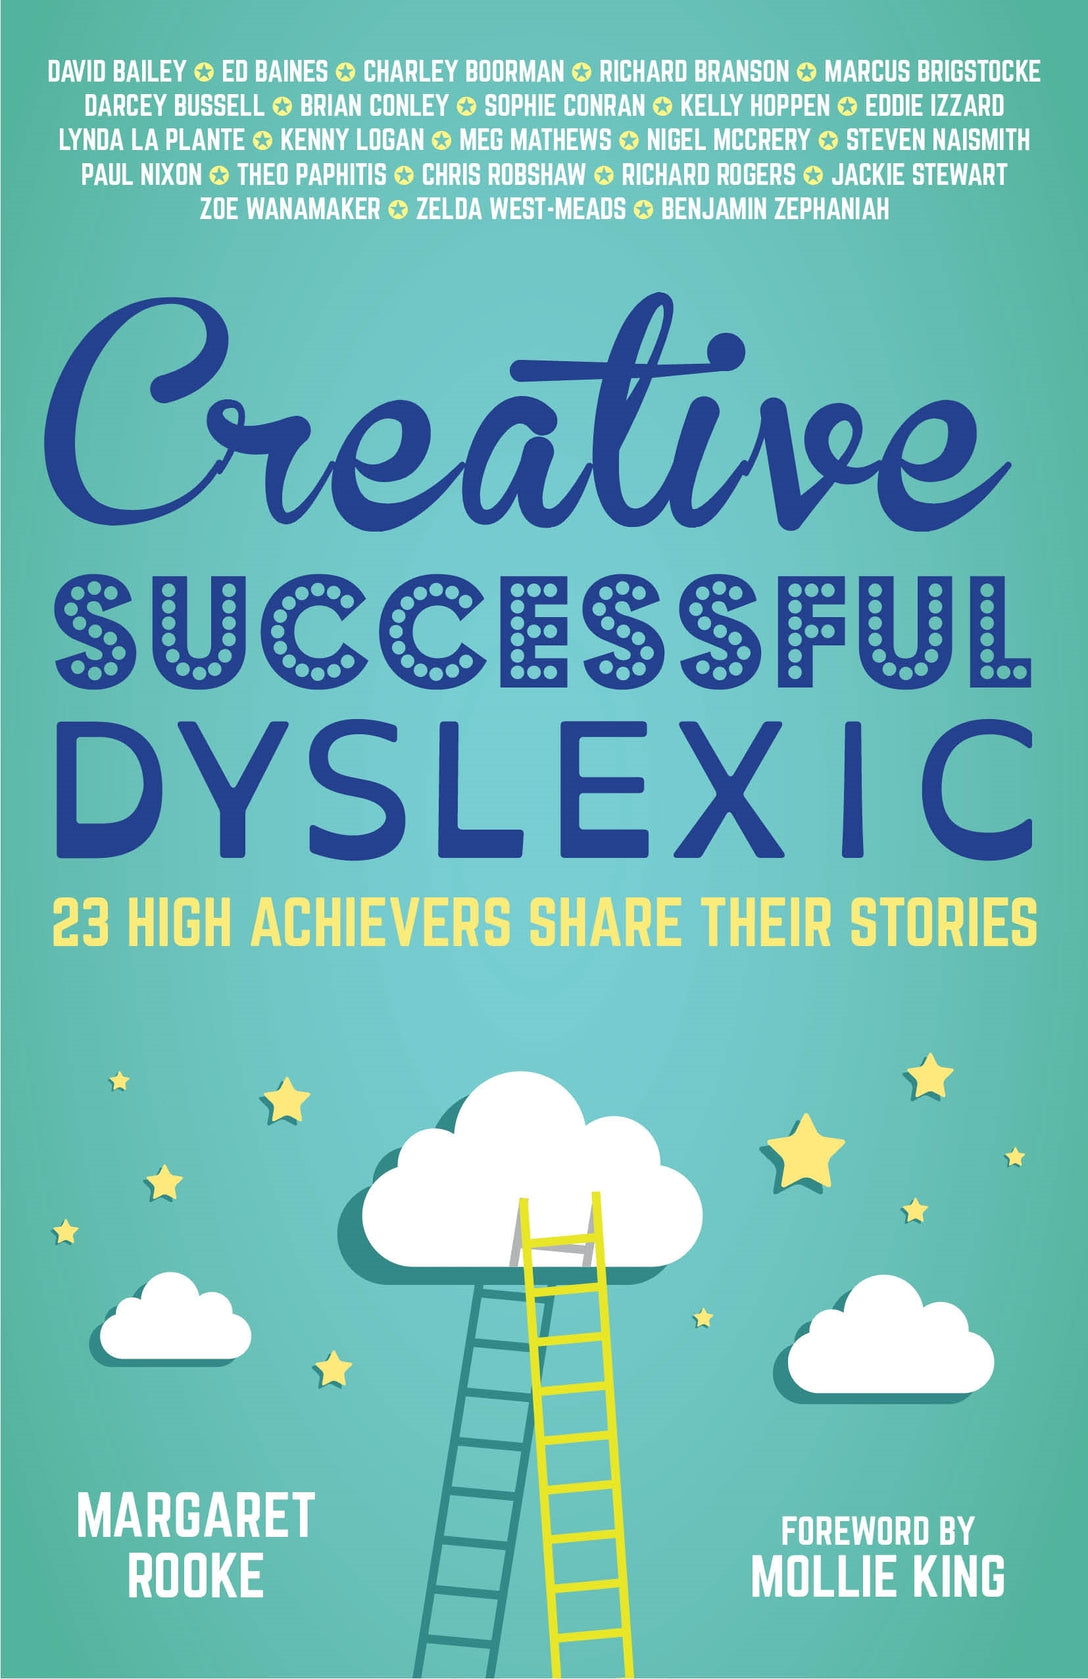 Creative, Successful, Dyslexic by Margaret Rooke, Mollie King, No Author Listed